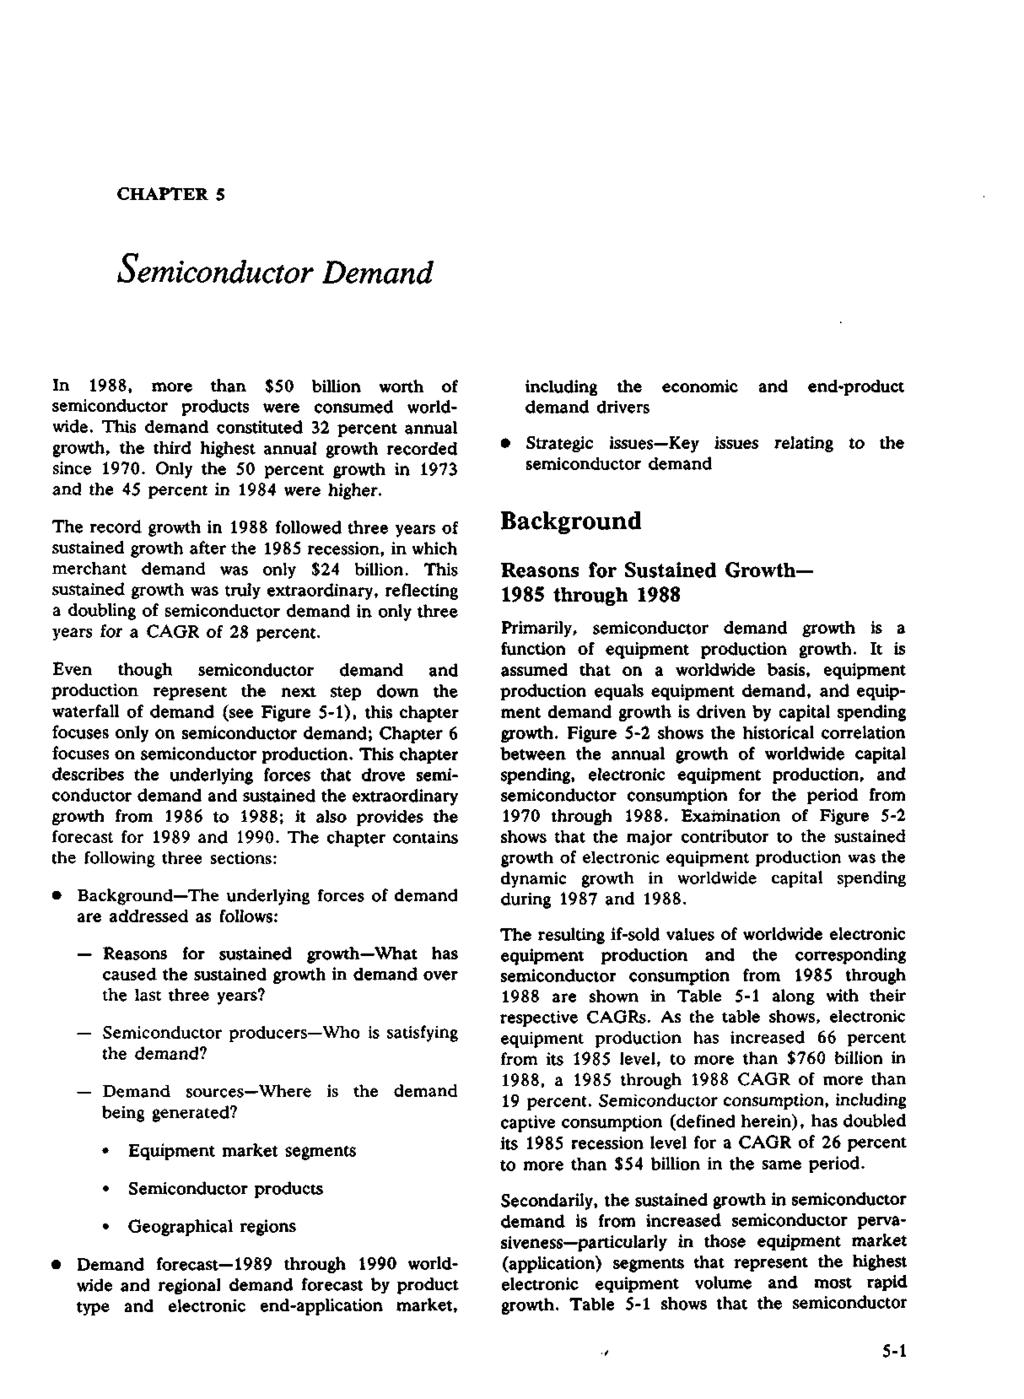 CHAPTER 5 Semiconductor Demand In 1988, more than 5 billion worth of semiconductor products were consumed worldwide.